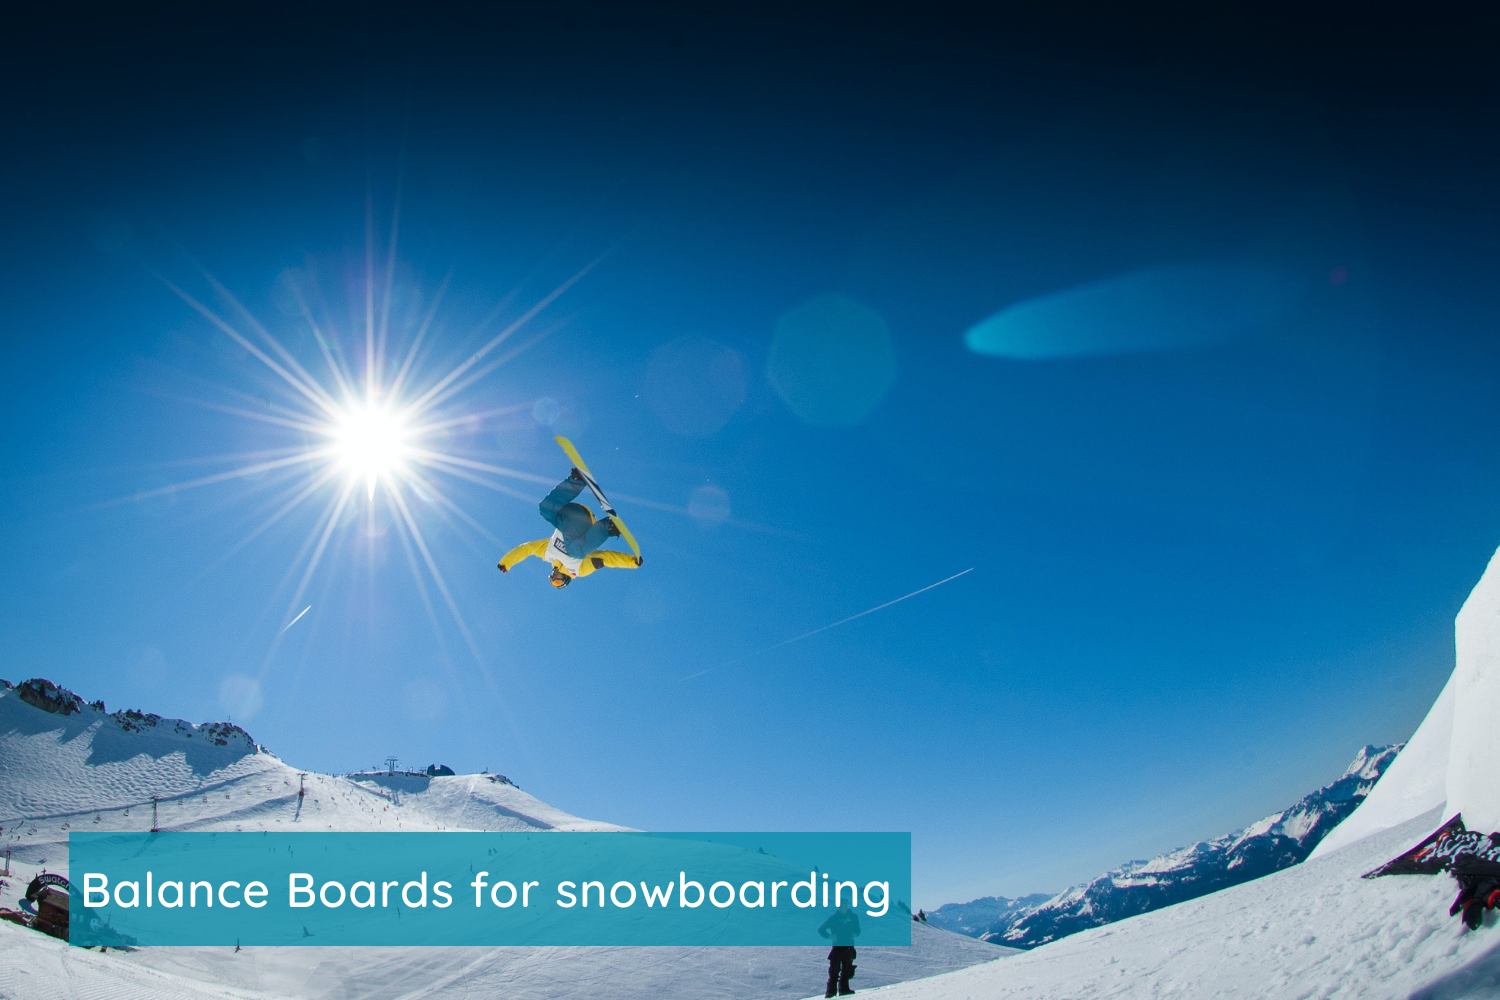 Balance Boards for snowboarding